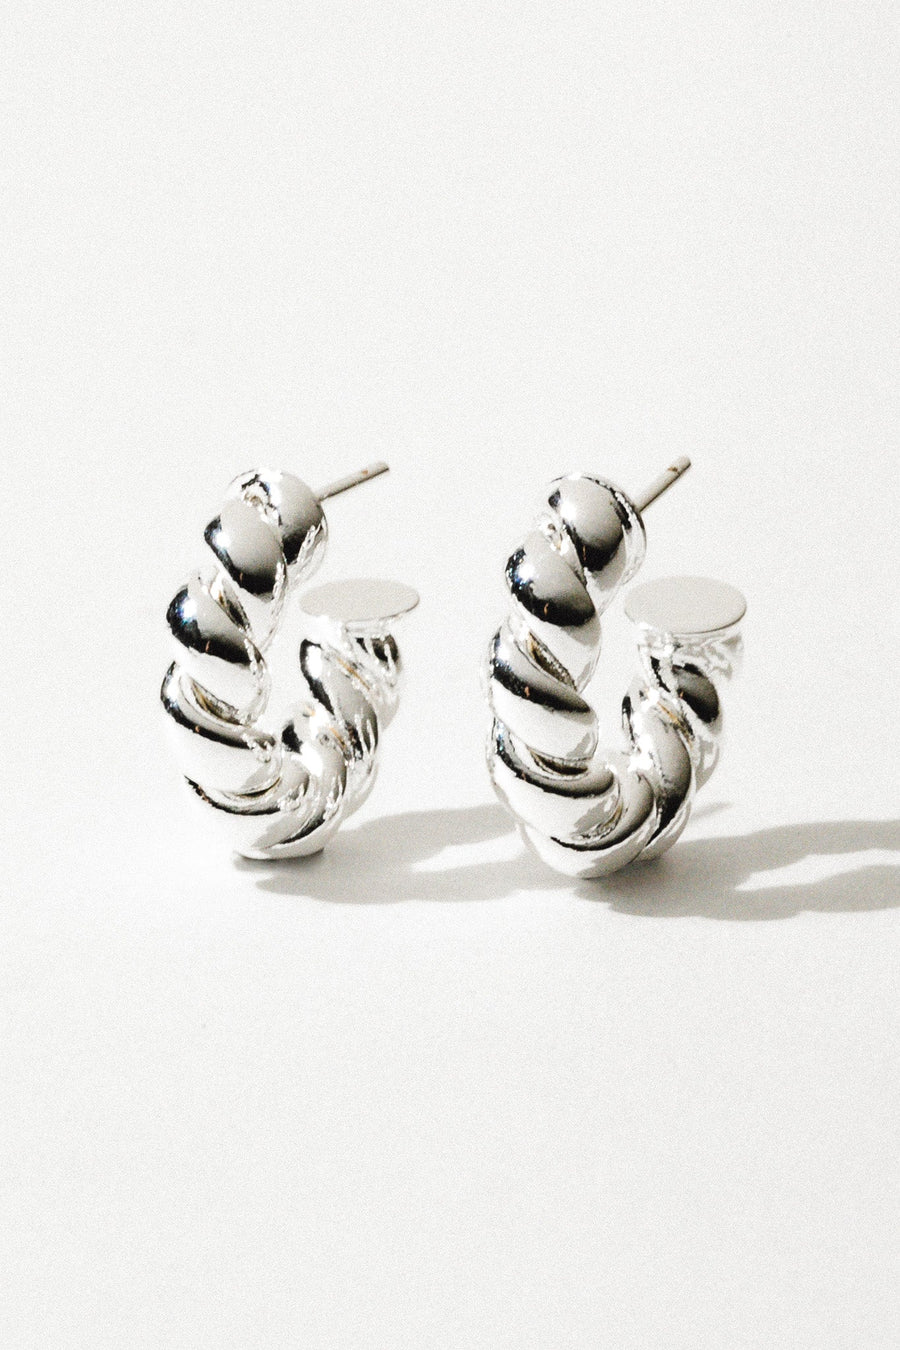 Dona Italia Jewelry Silver / Small Twisted Sister Earrings.:.Silver